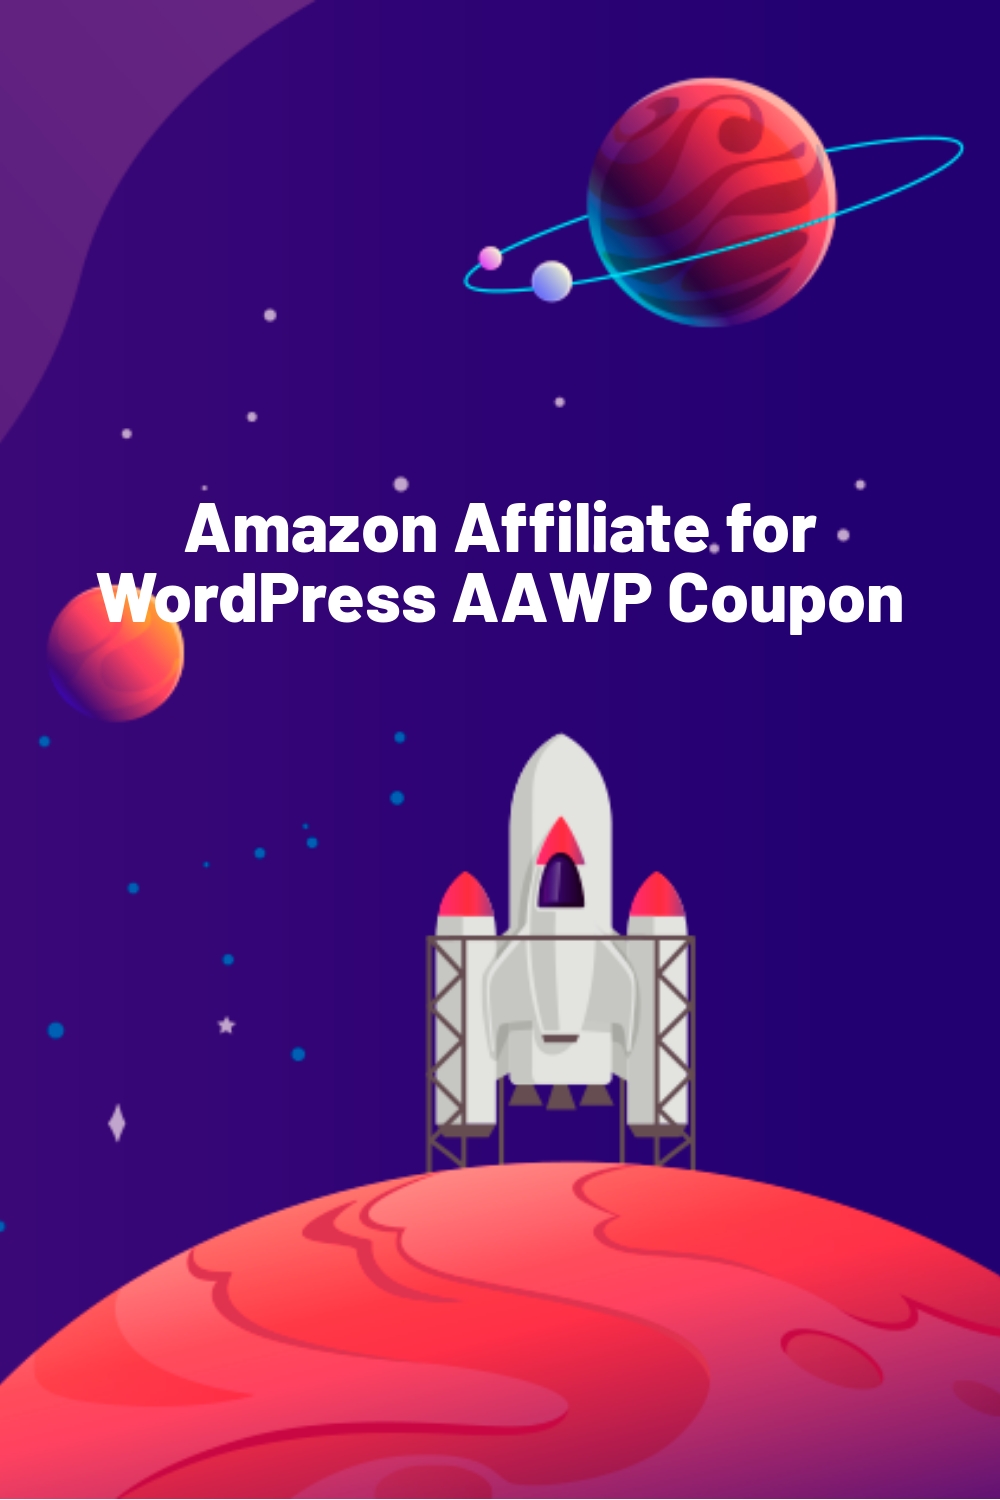 Amazon Affiliate for WordPress AAWP Coupon